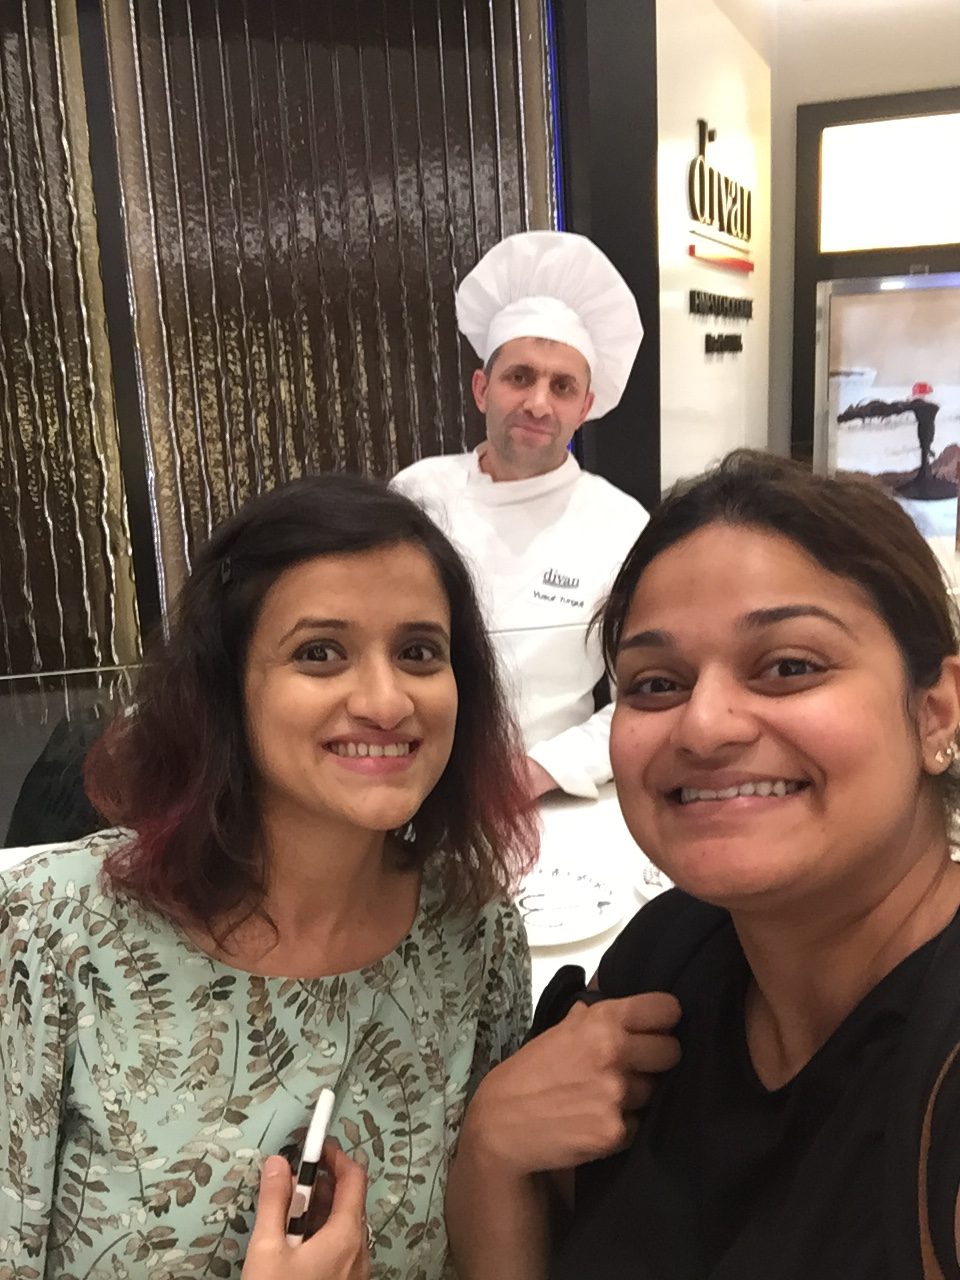 Divan Patisserie|Elated to have Vini join me on my first #NomWithMe. The chef insisted on being photobombed :D